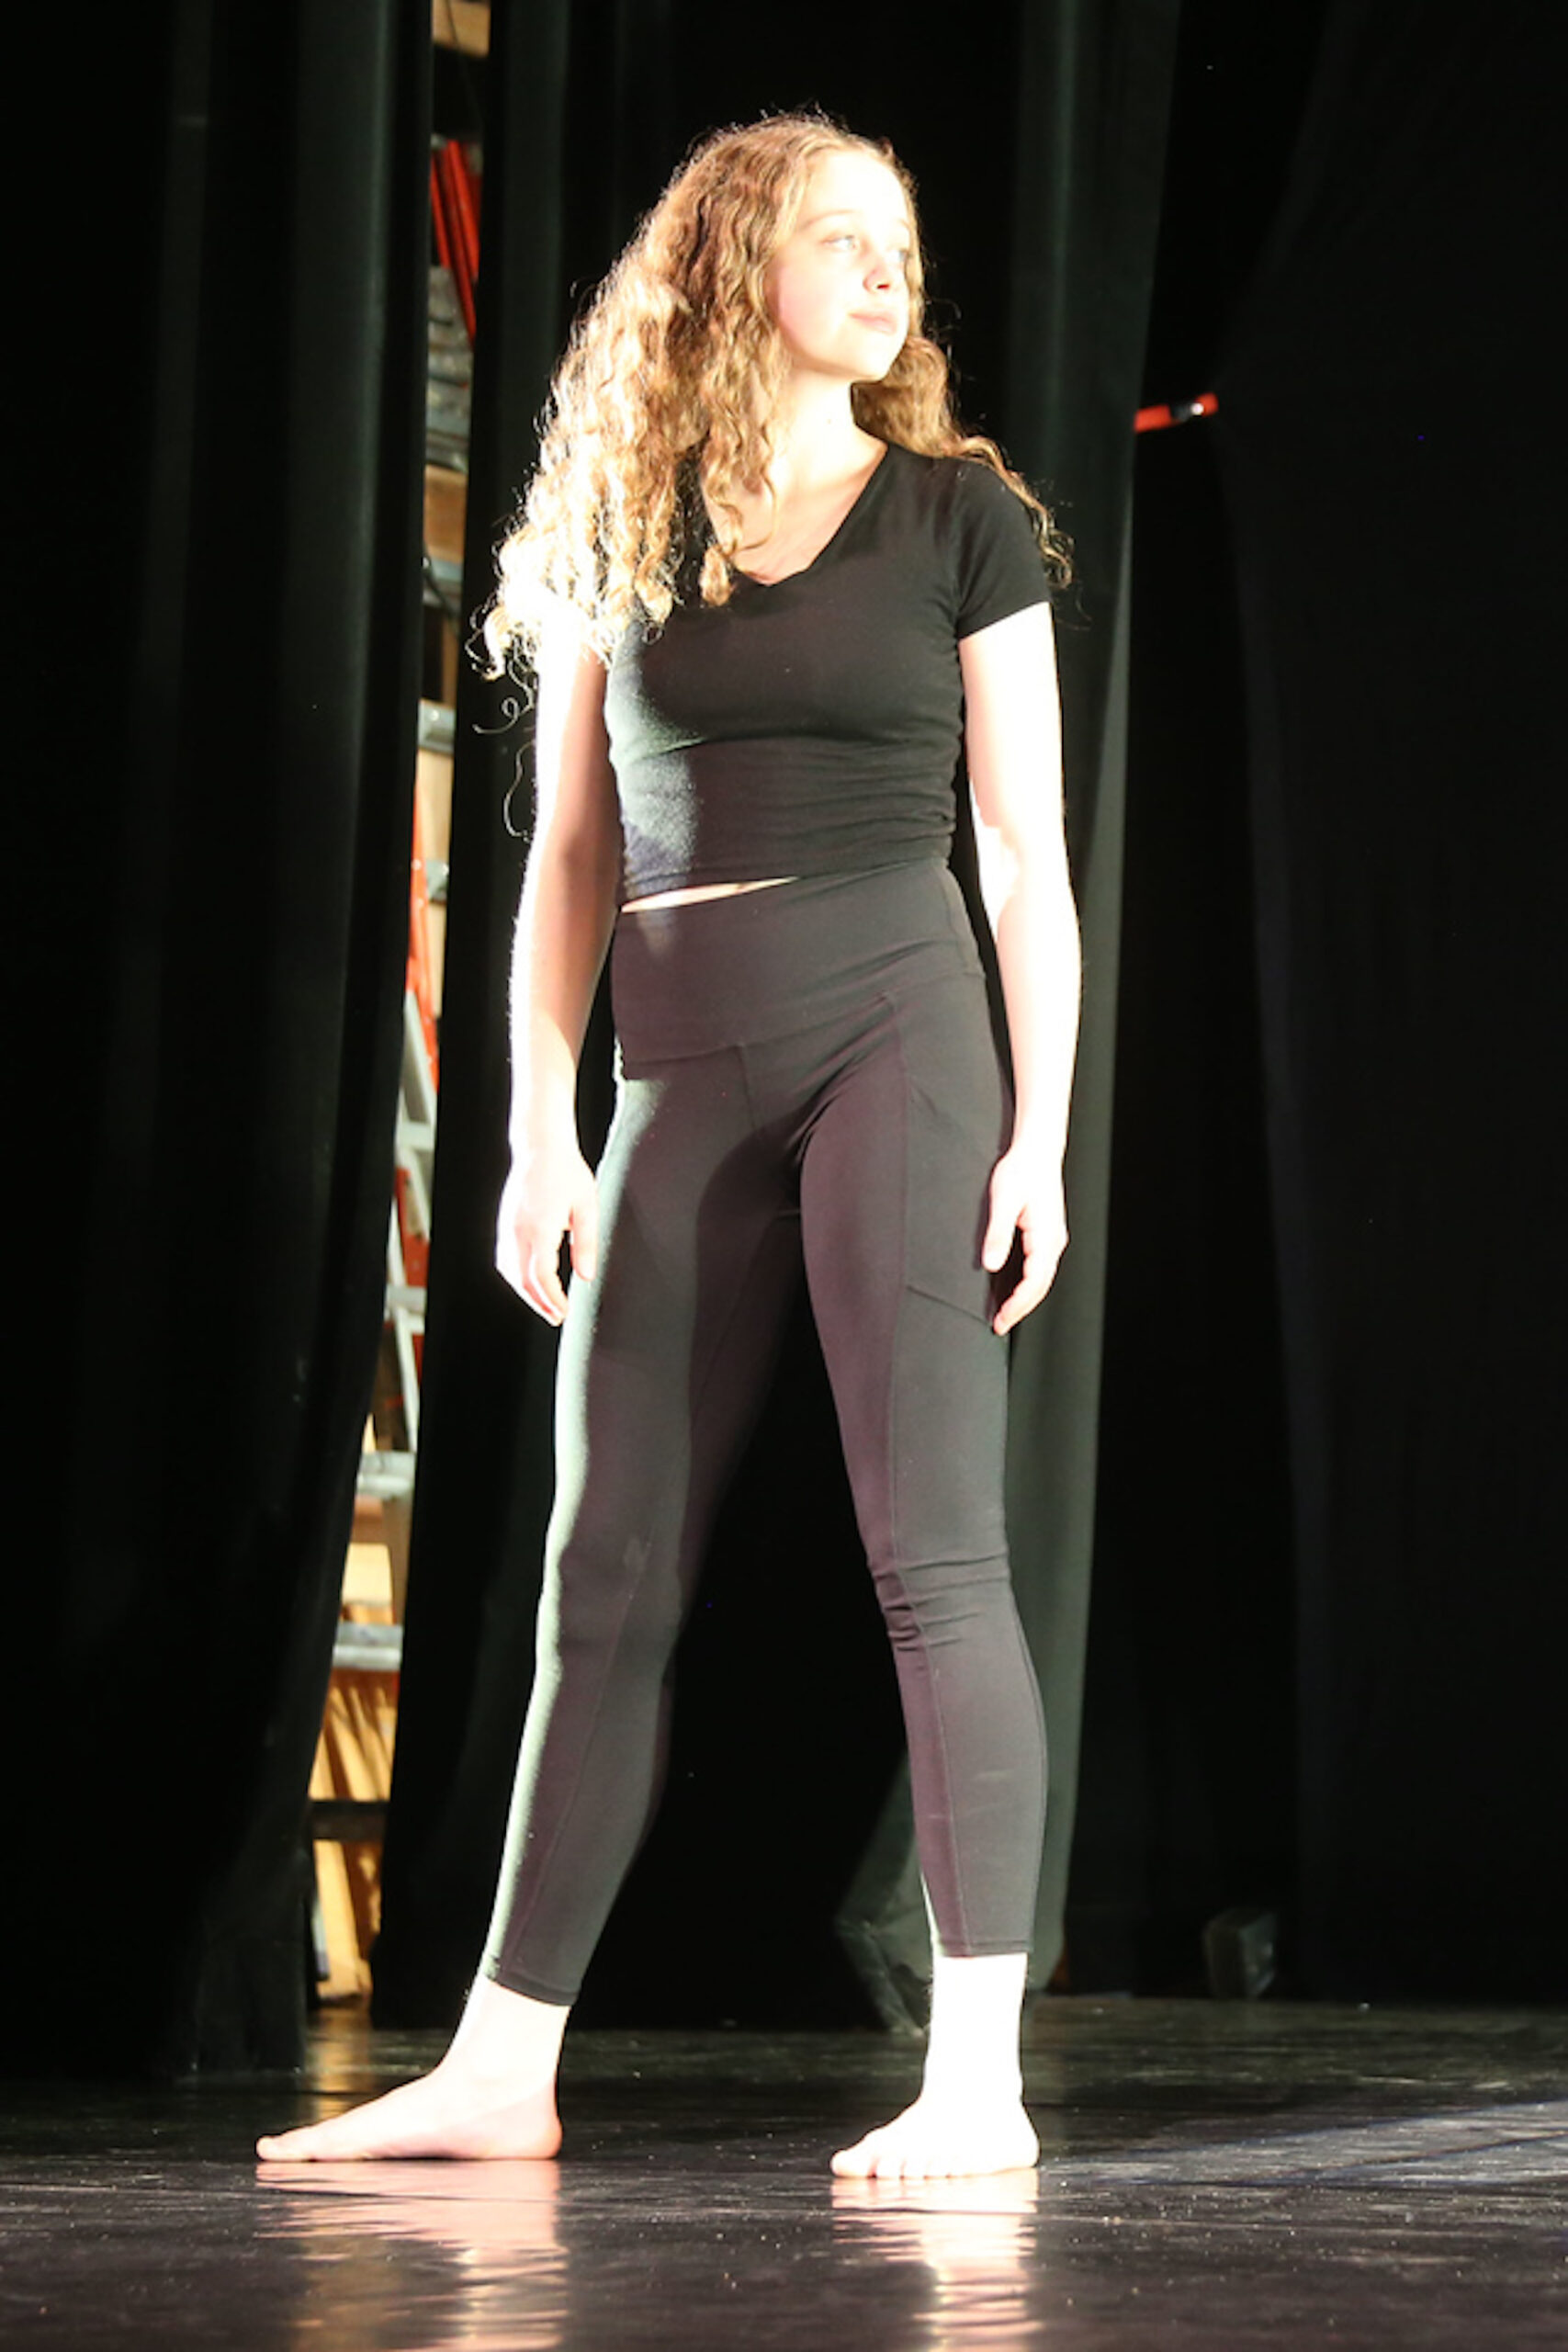 Fieldston Upper student performs on stage; she stands still, arms by her side, looking out toward the audience.